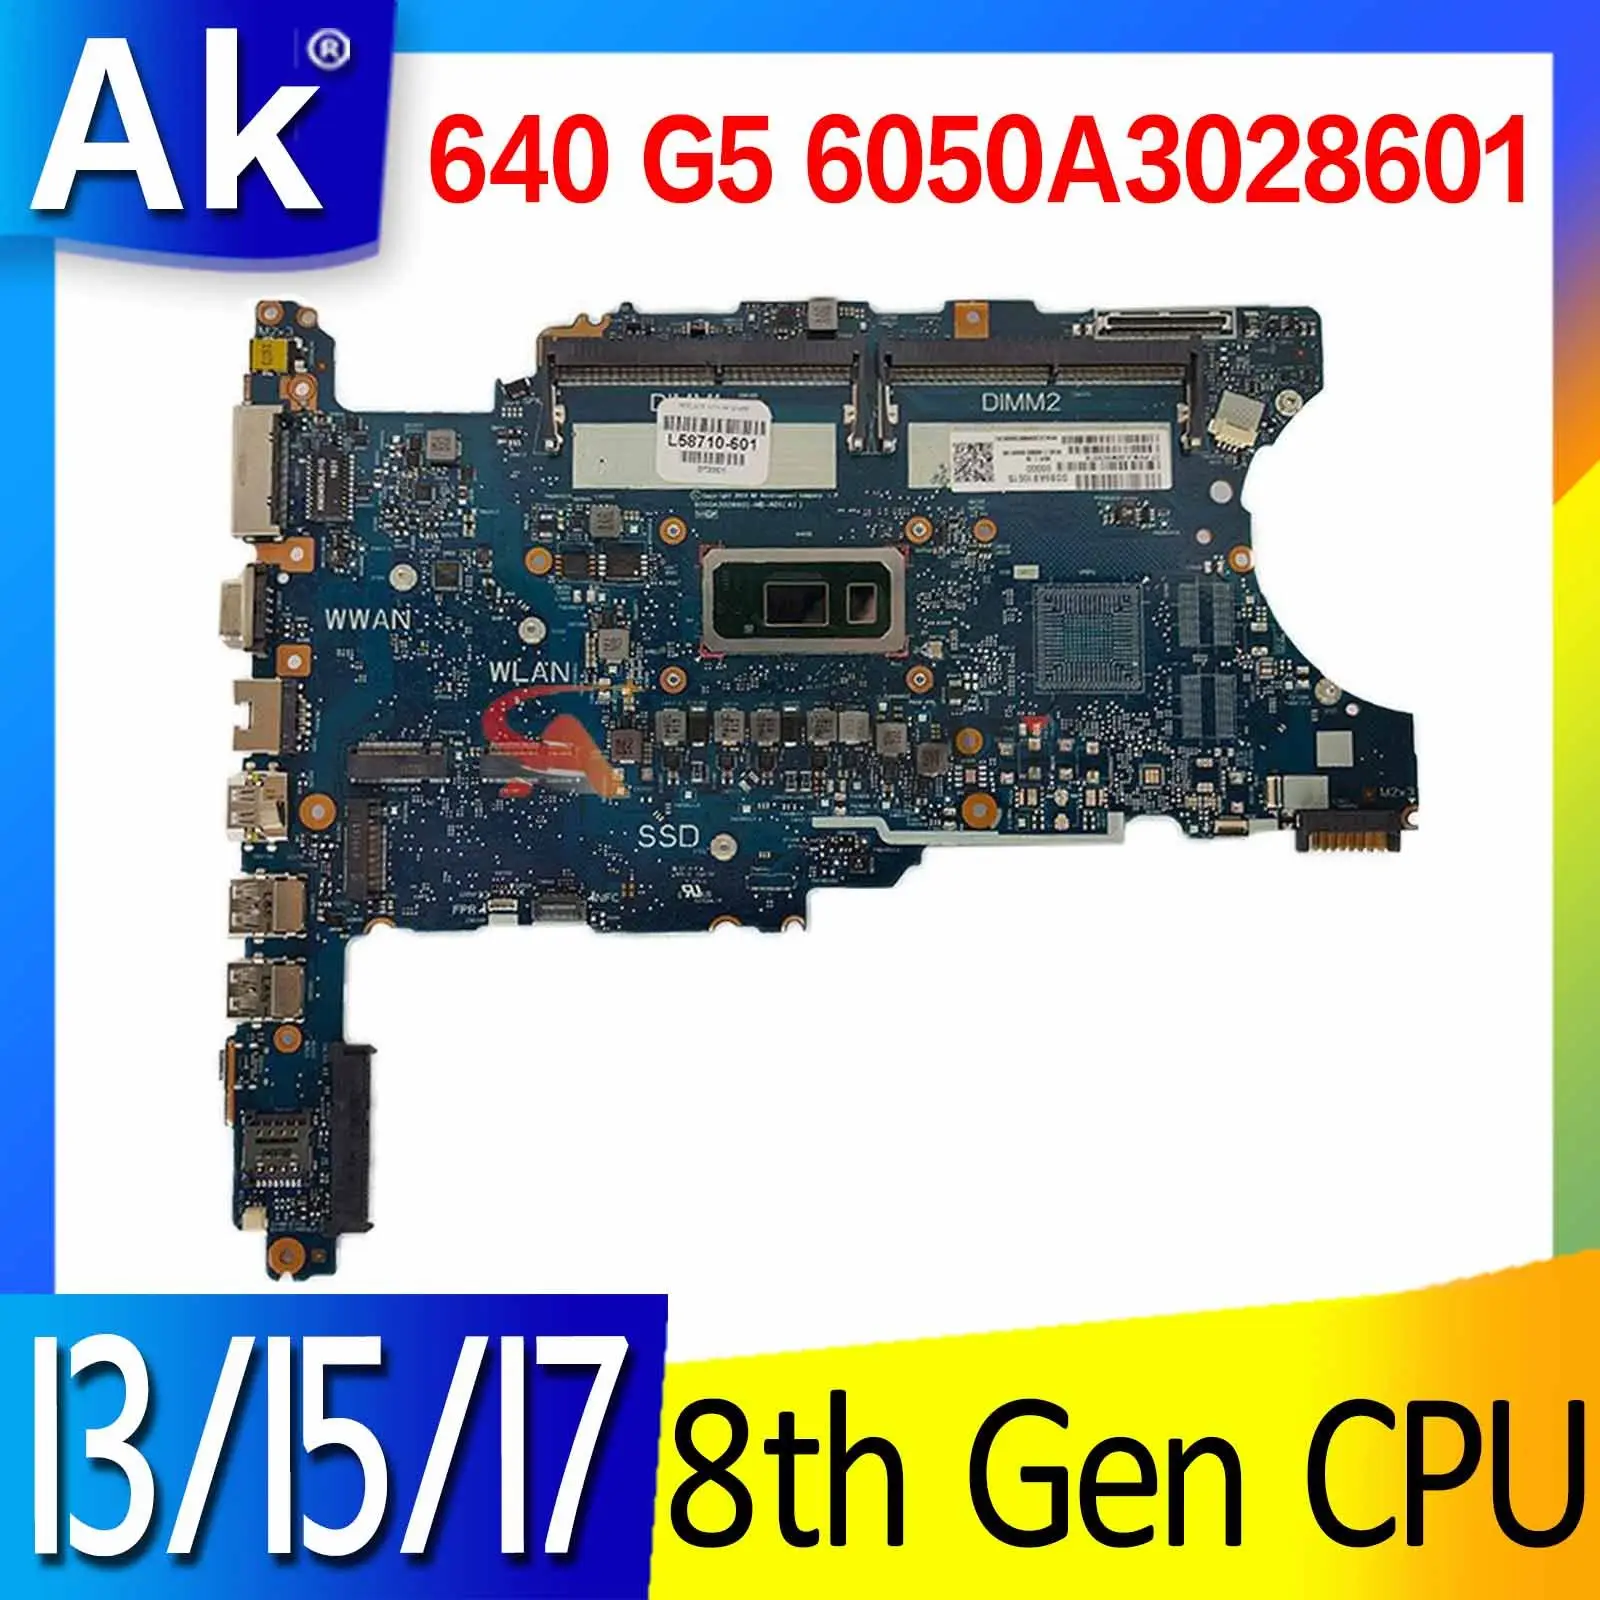 

For HP ProBook 640 G5 laptop motherboard mainboard 640 G5 6050A3028601 motherboard with I3 I5 I7 8th Gen CPU UMA